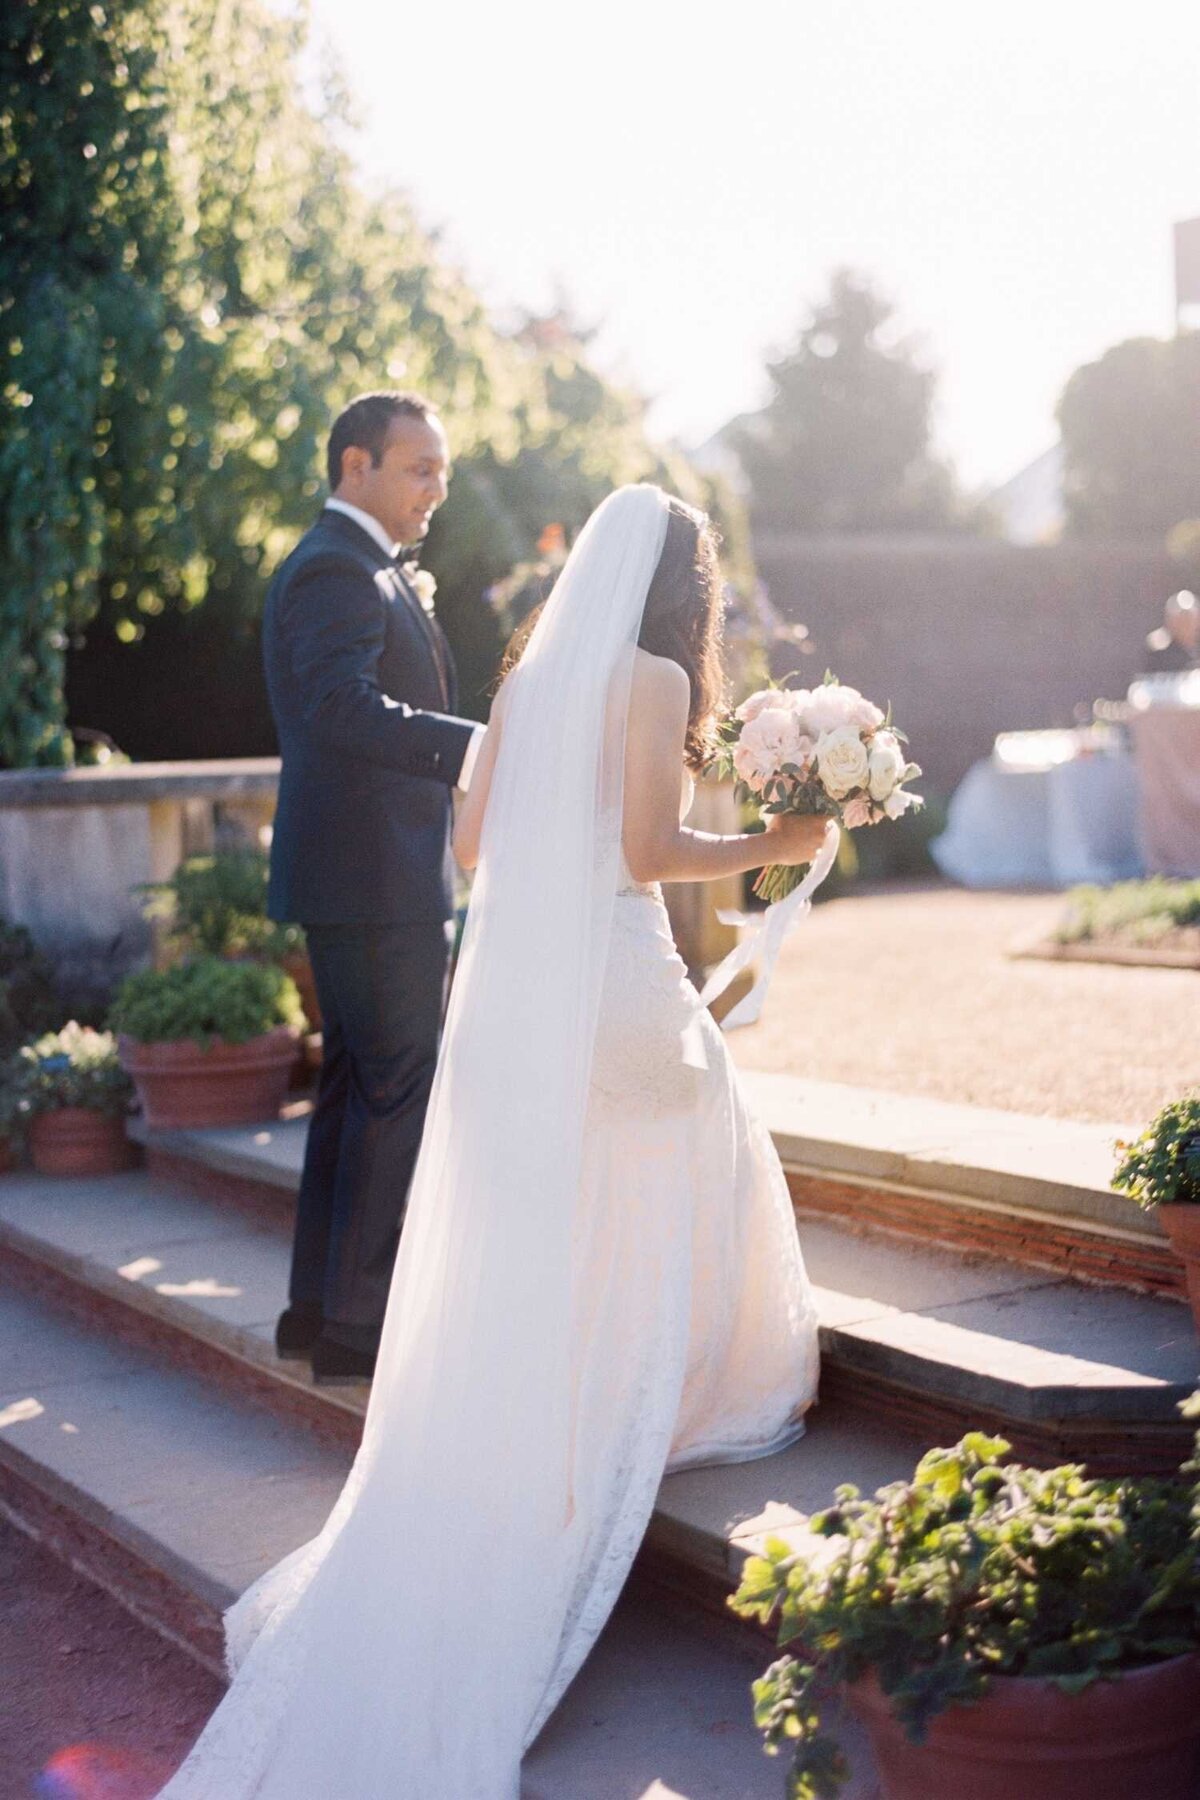 Bride and Groom walking down the aisle at Luxury Chicago North Shore Garden Wedding Venue